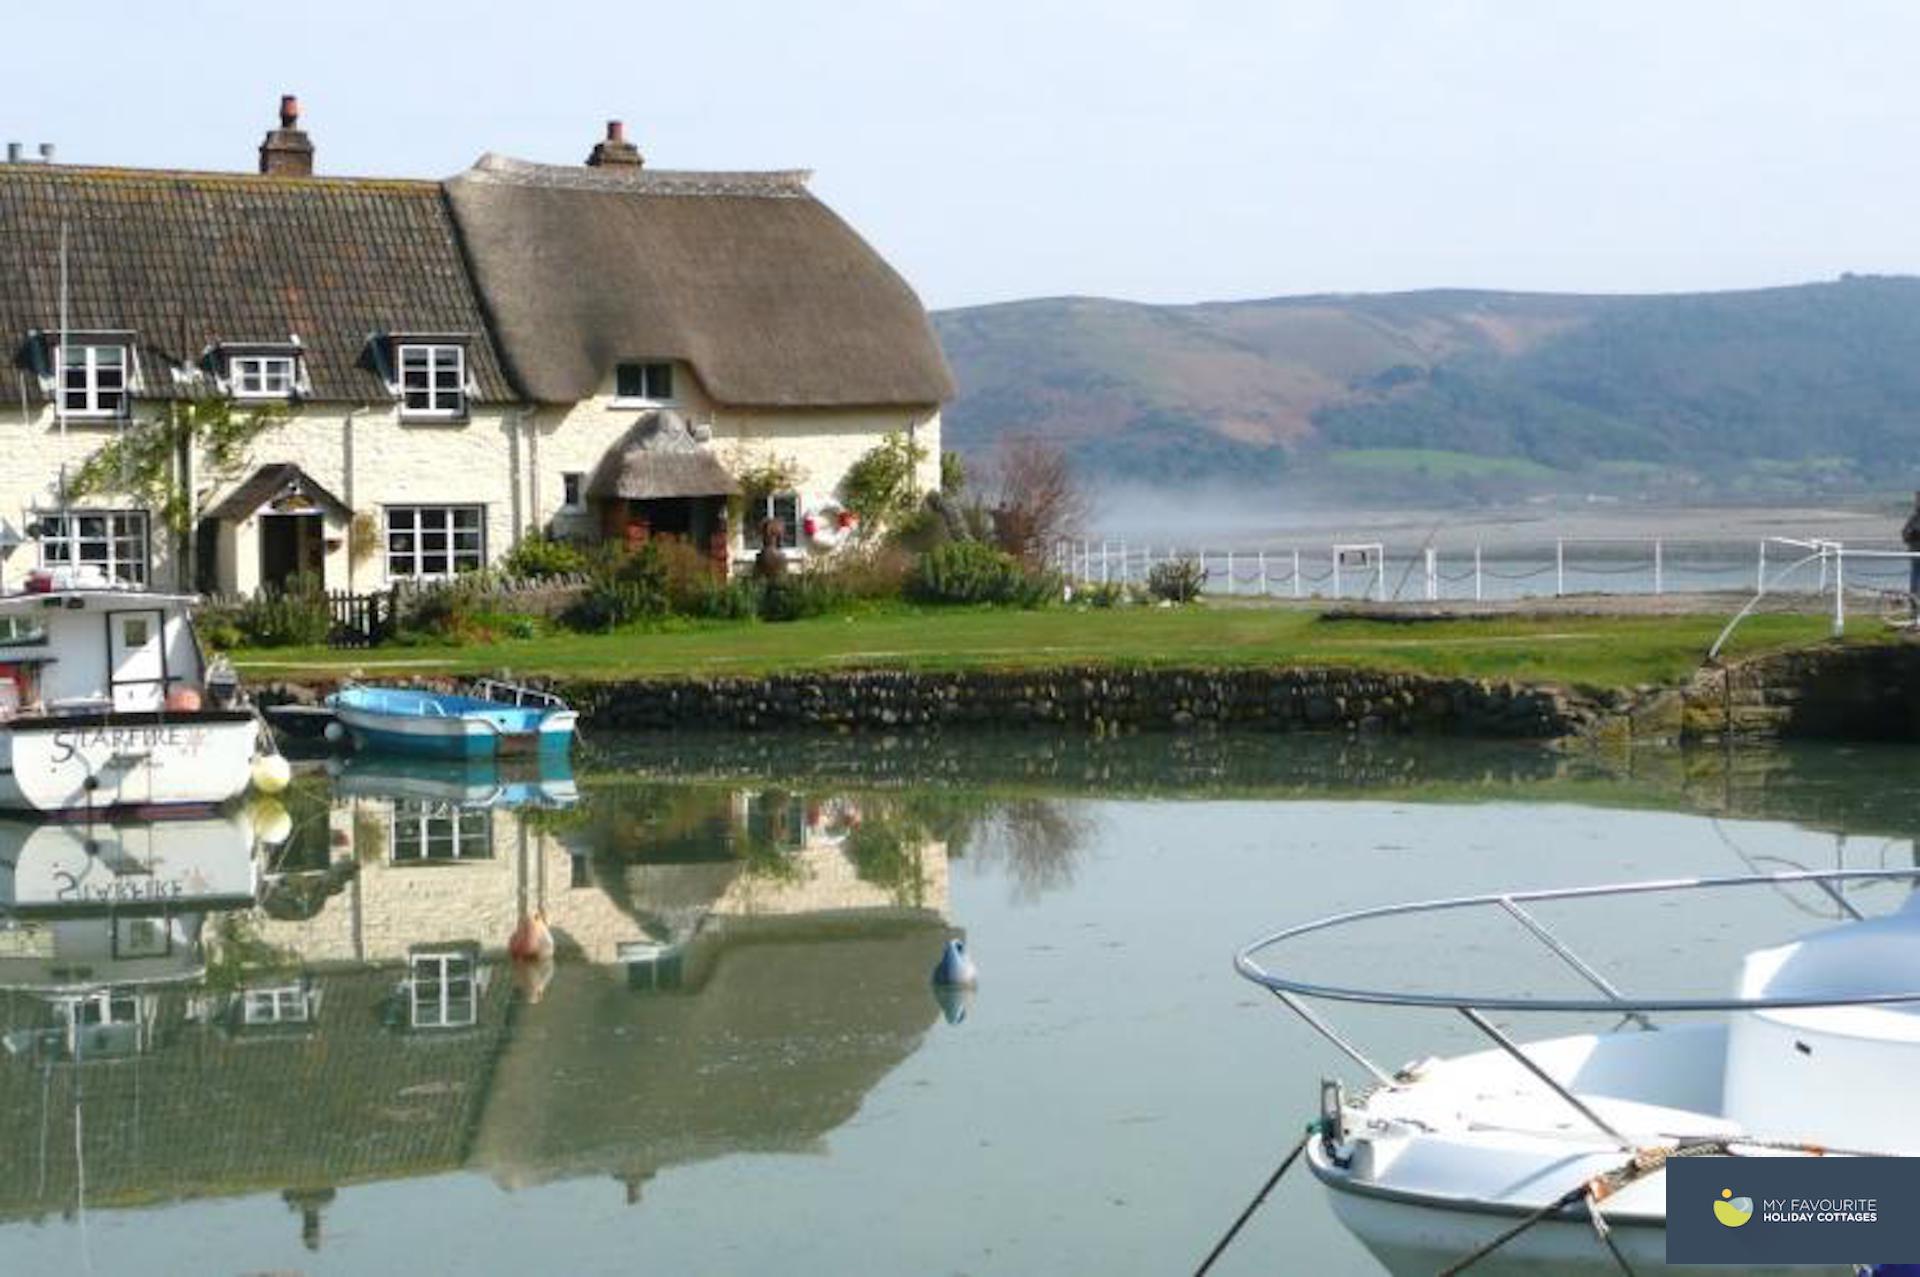 a thatched holiday cottage in Porlock Weir over looks a small harbour with a few boats ar moored.